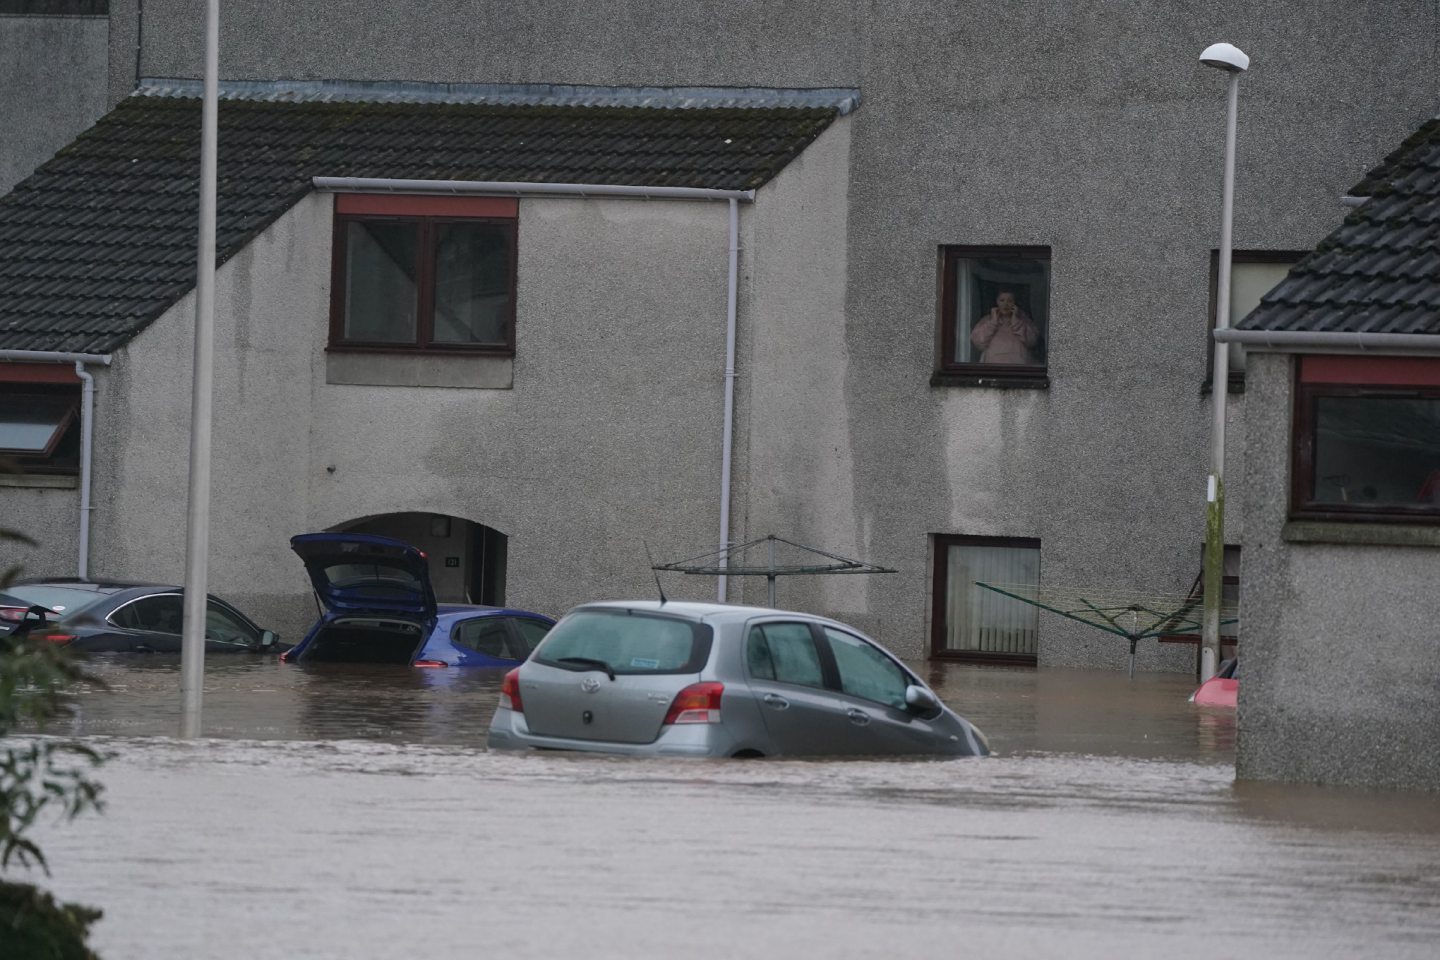 Cars are submerged underwater in Brechin following Storm Babet.